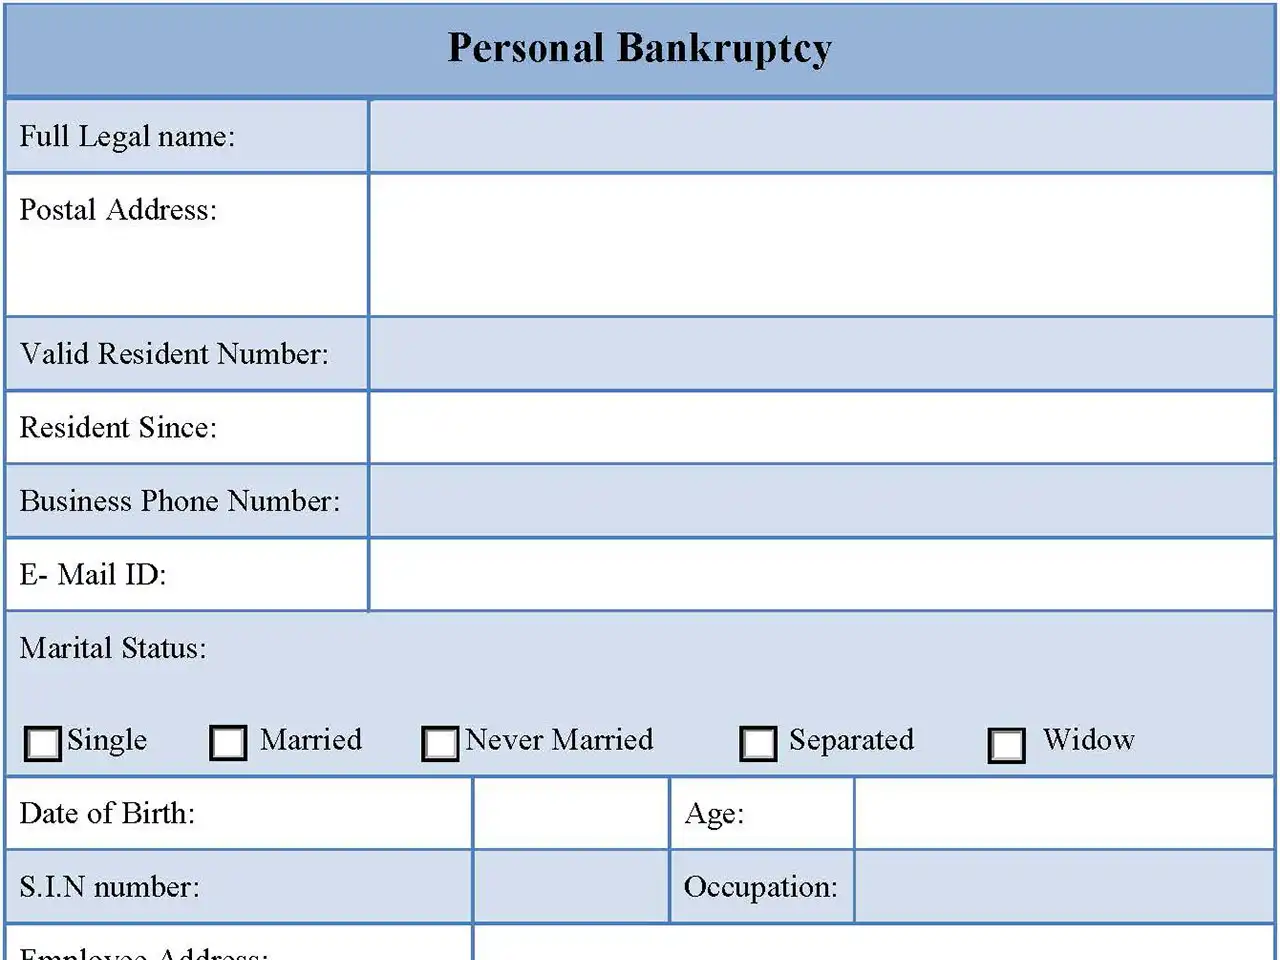 Personal Bankruptcy Form